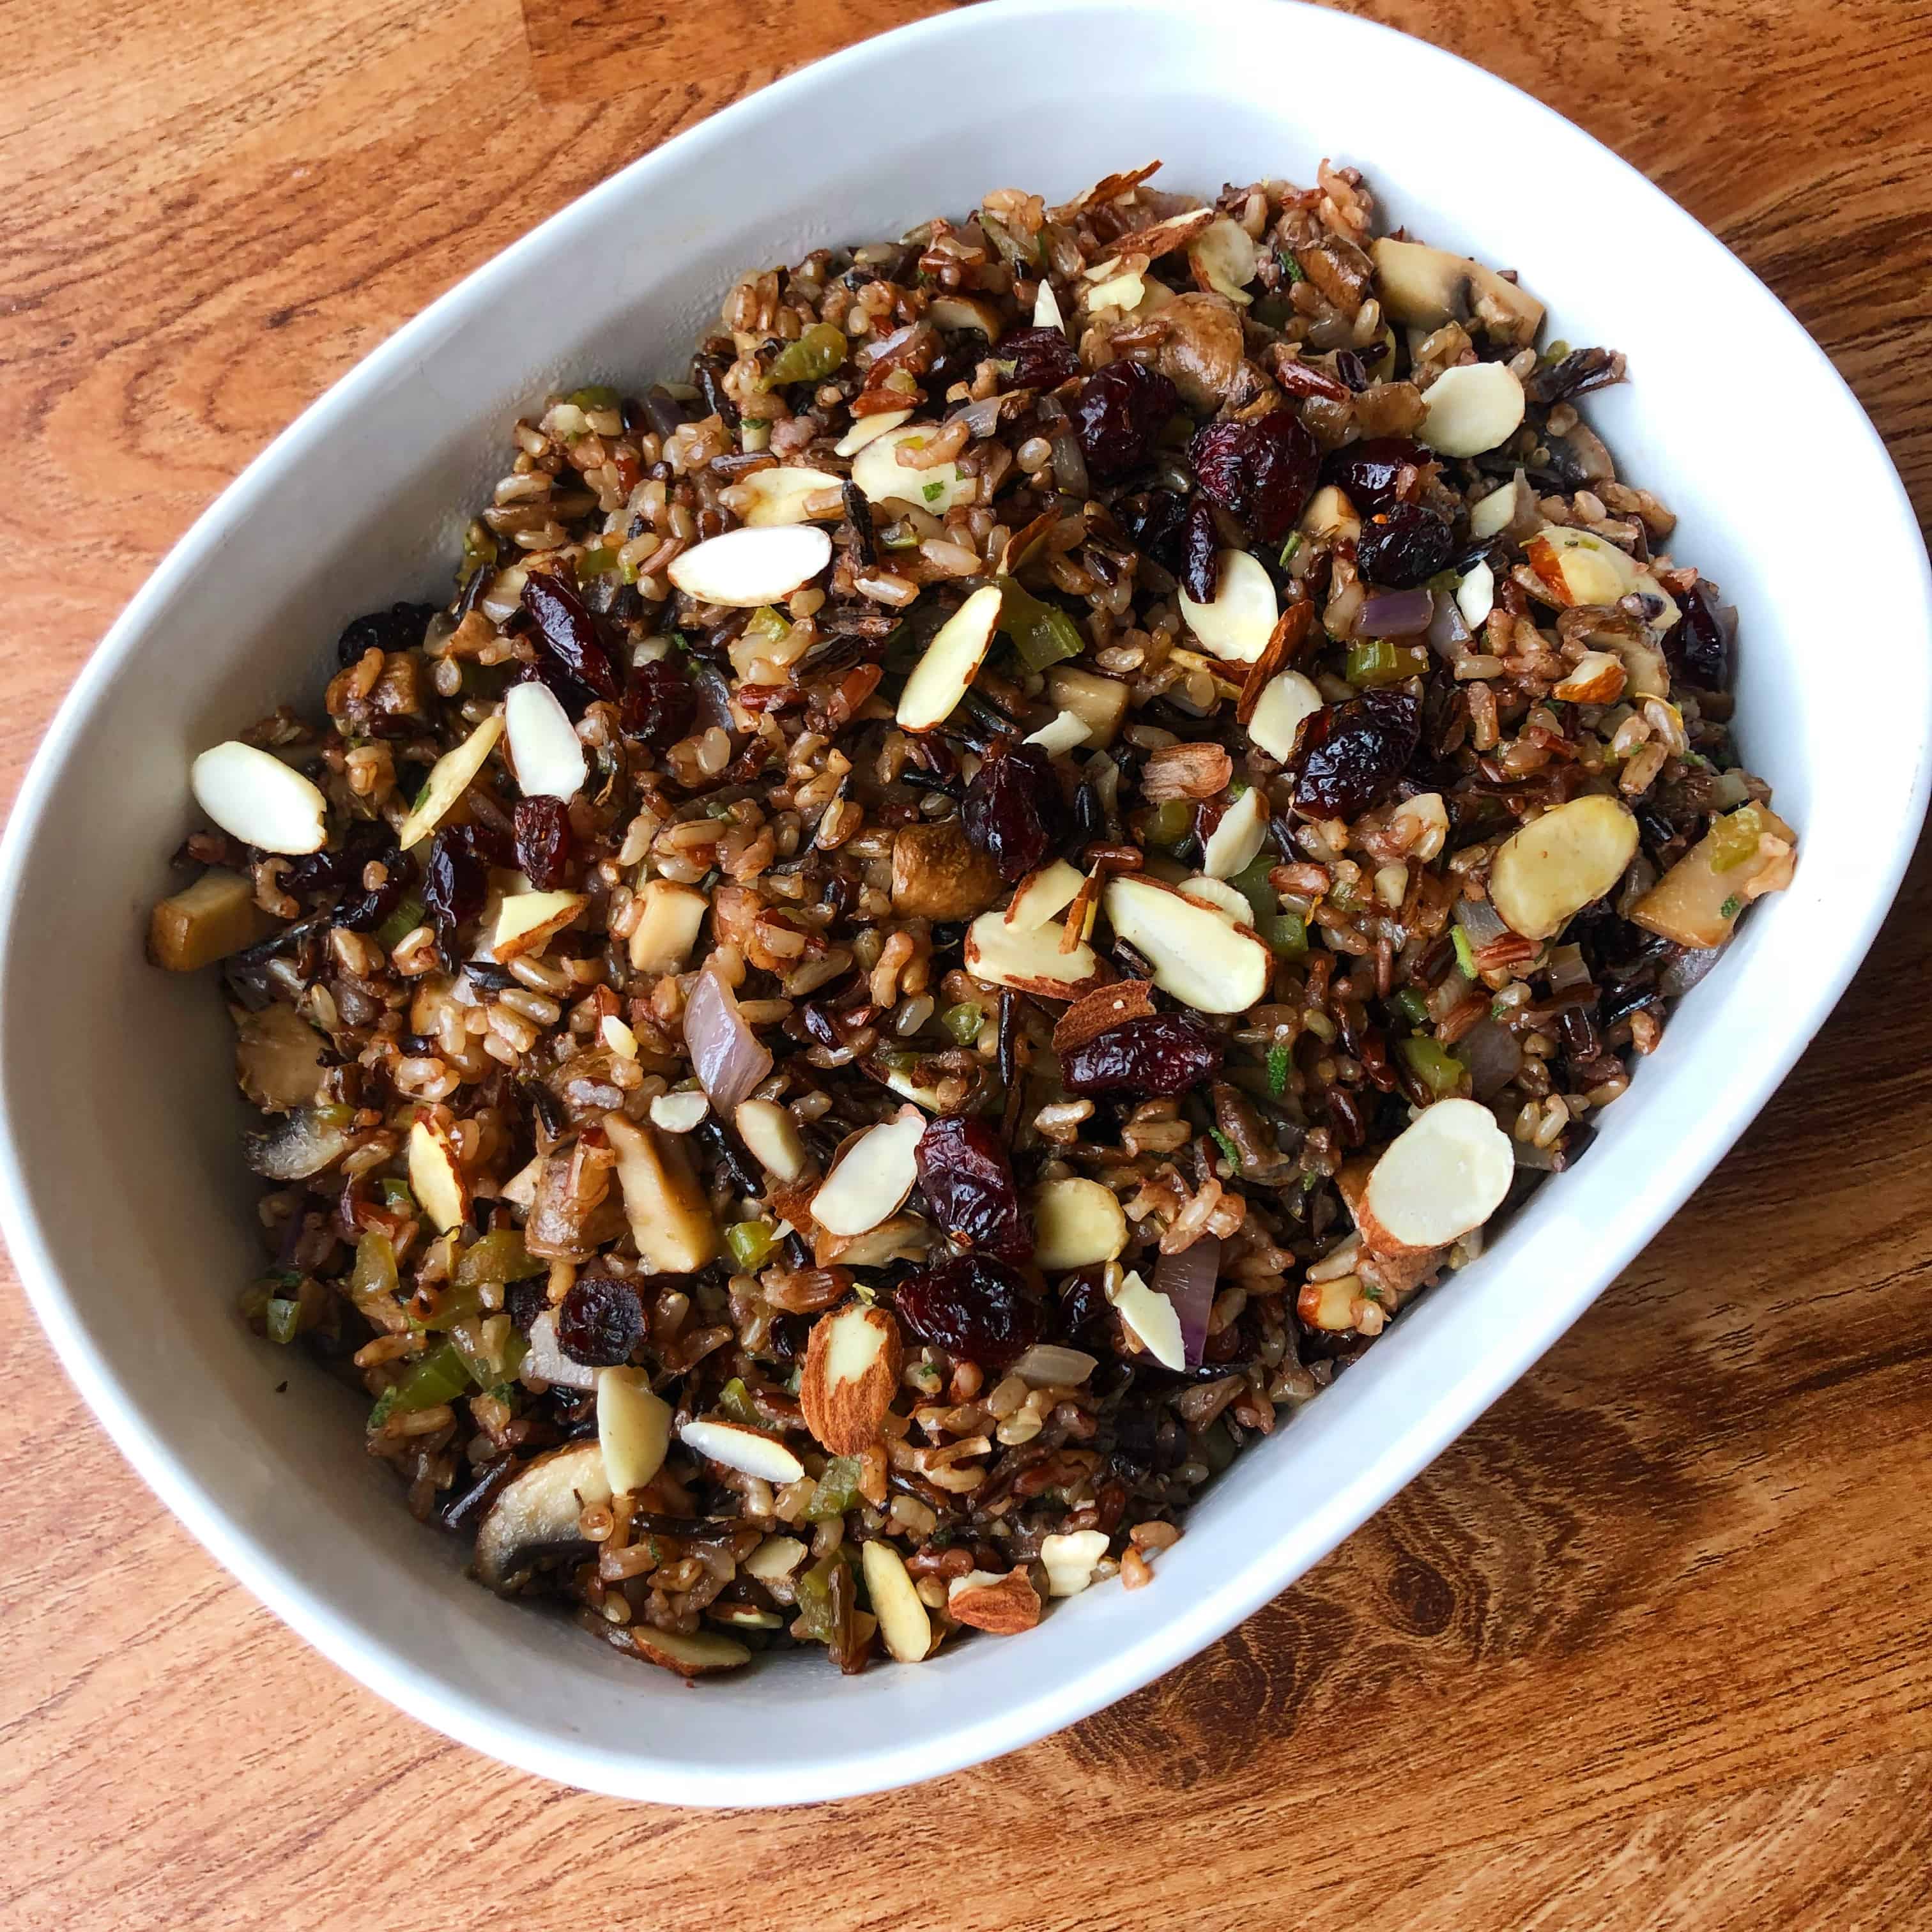 Gluten Free Wild Rice Stuffing with Mushrooms, Celery, Almonds and Cranberries